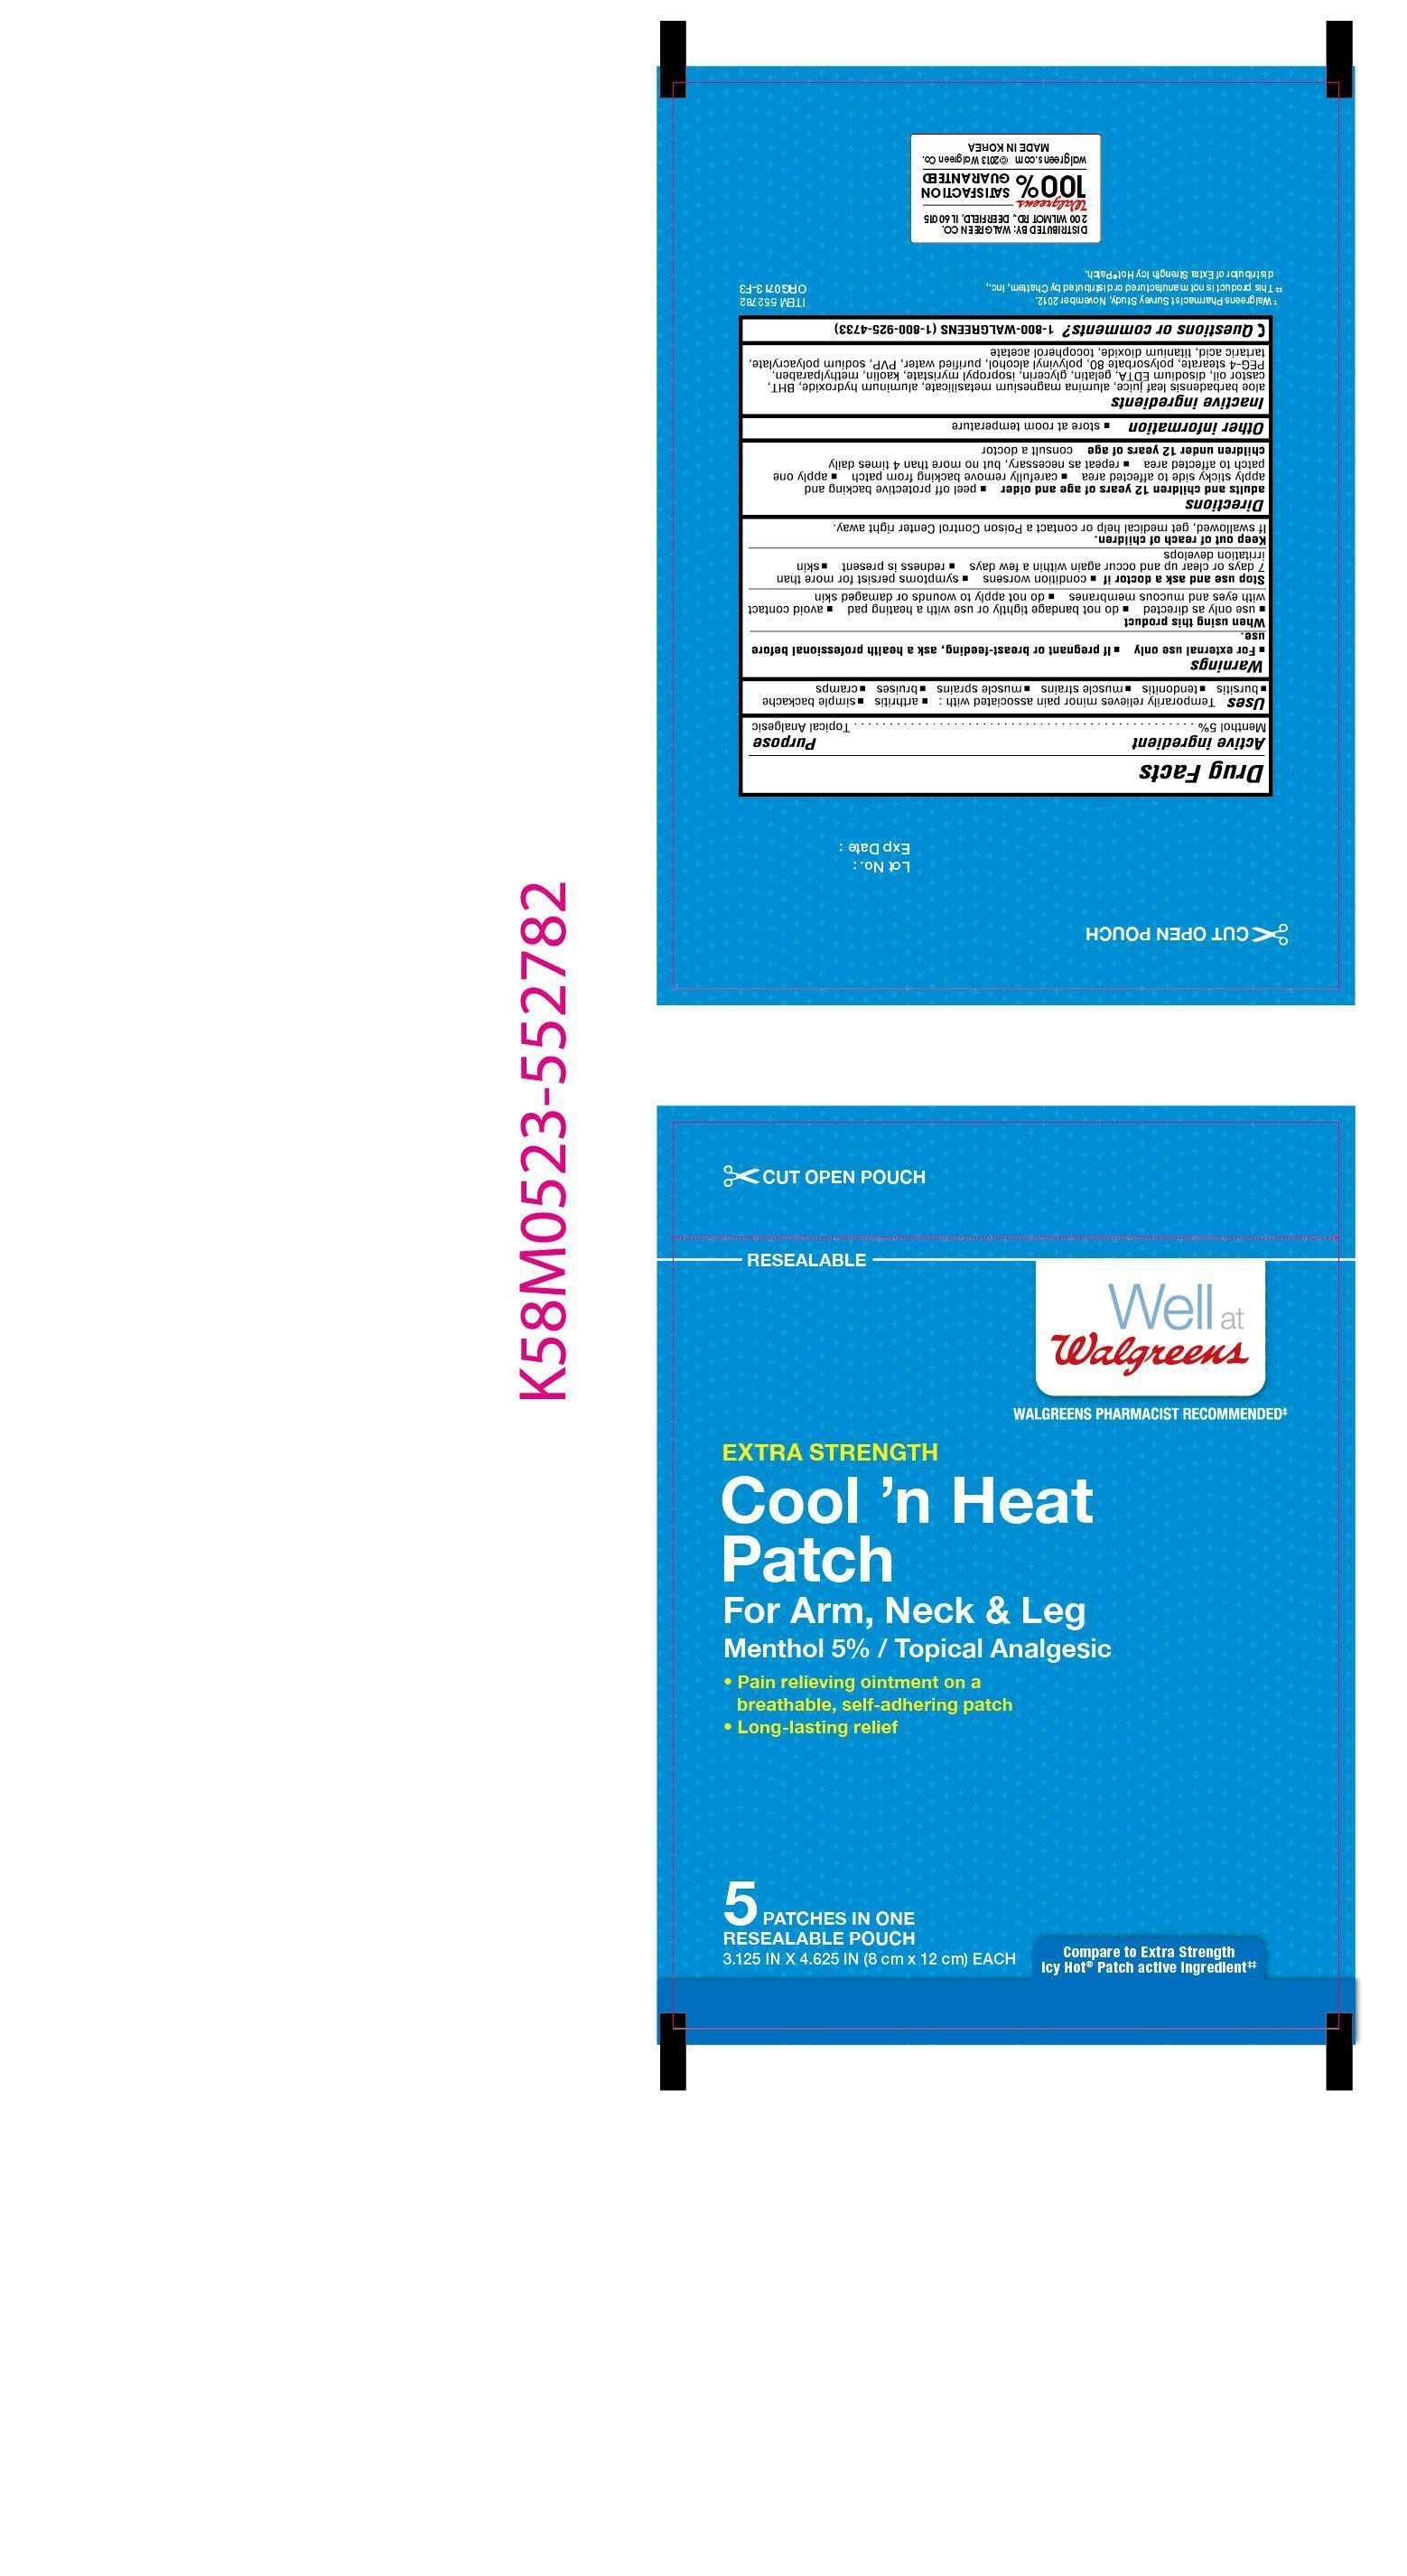 Is Cool N Heat Patch For Arm, Neck And Leg Extra Strength | Menthol Patch safe while breastfeeding